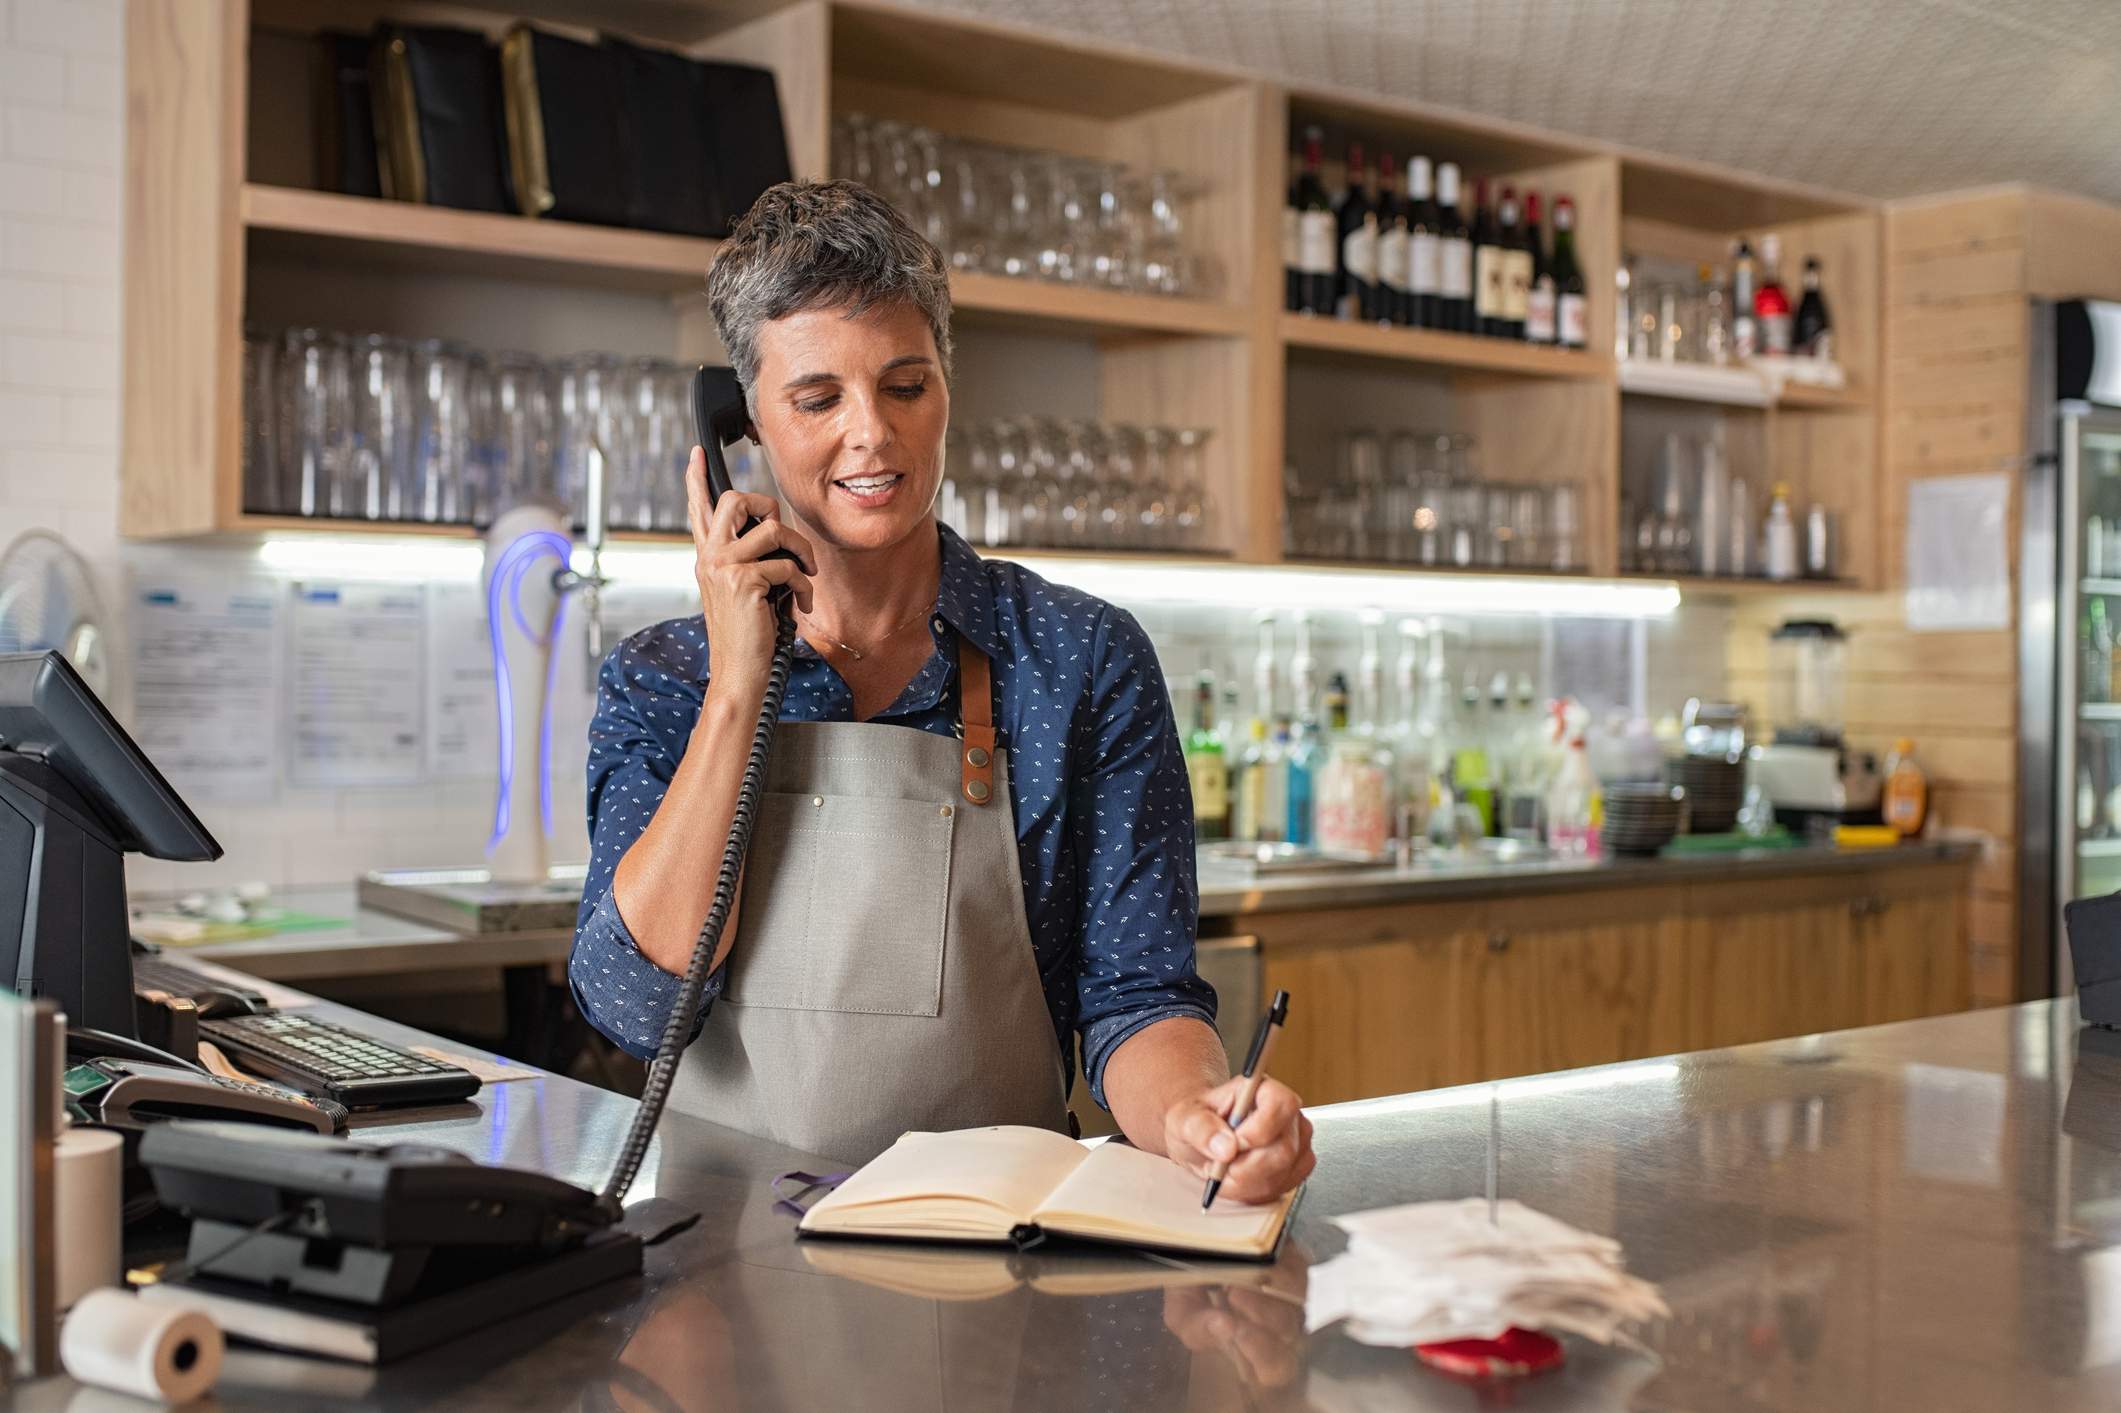 Image depicts a restaurant worker talking on the phone.